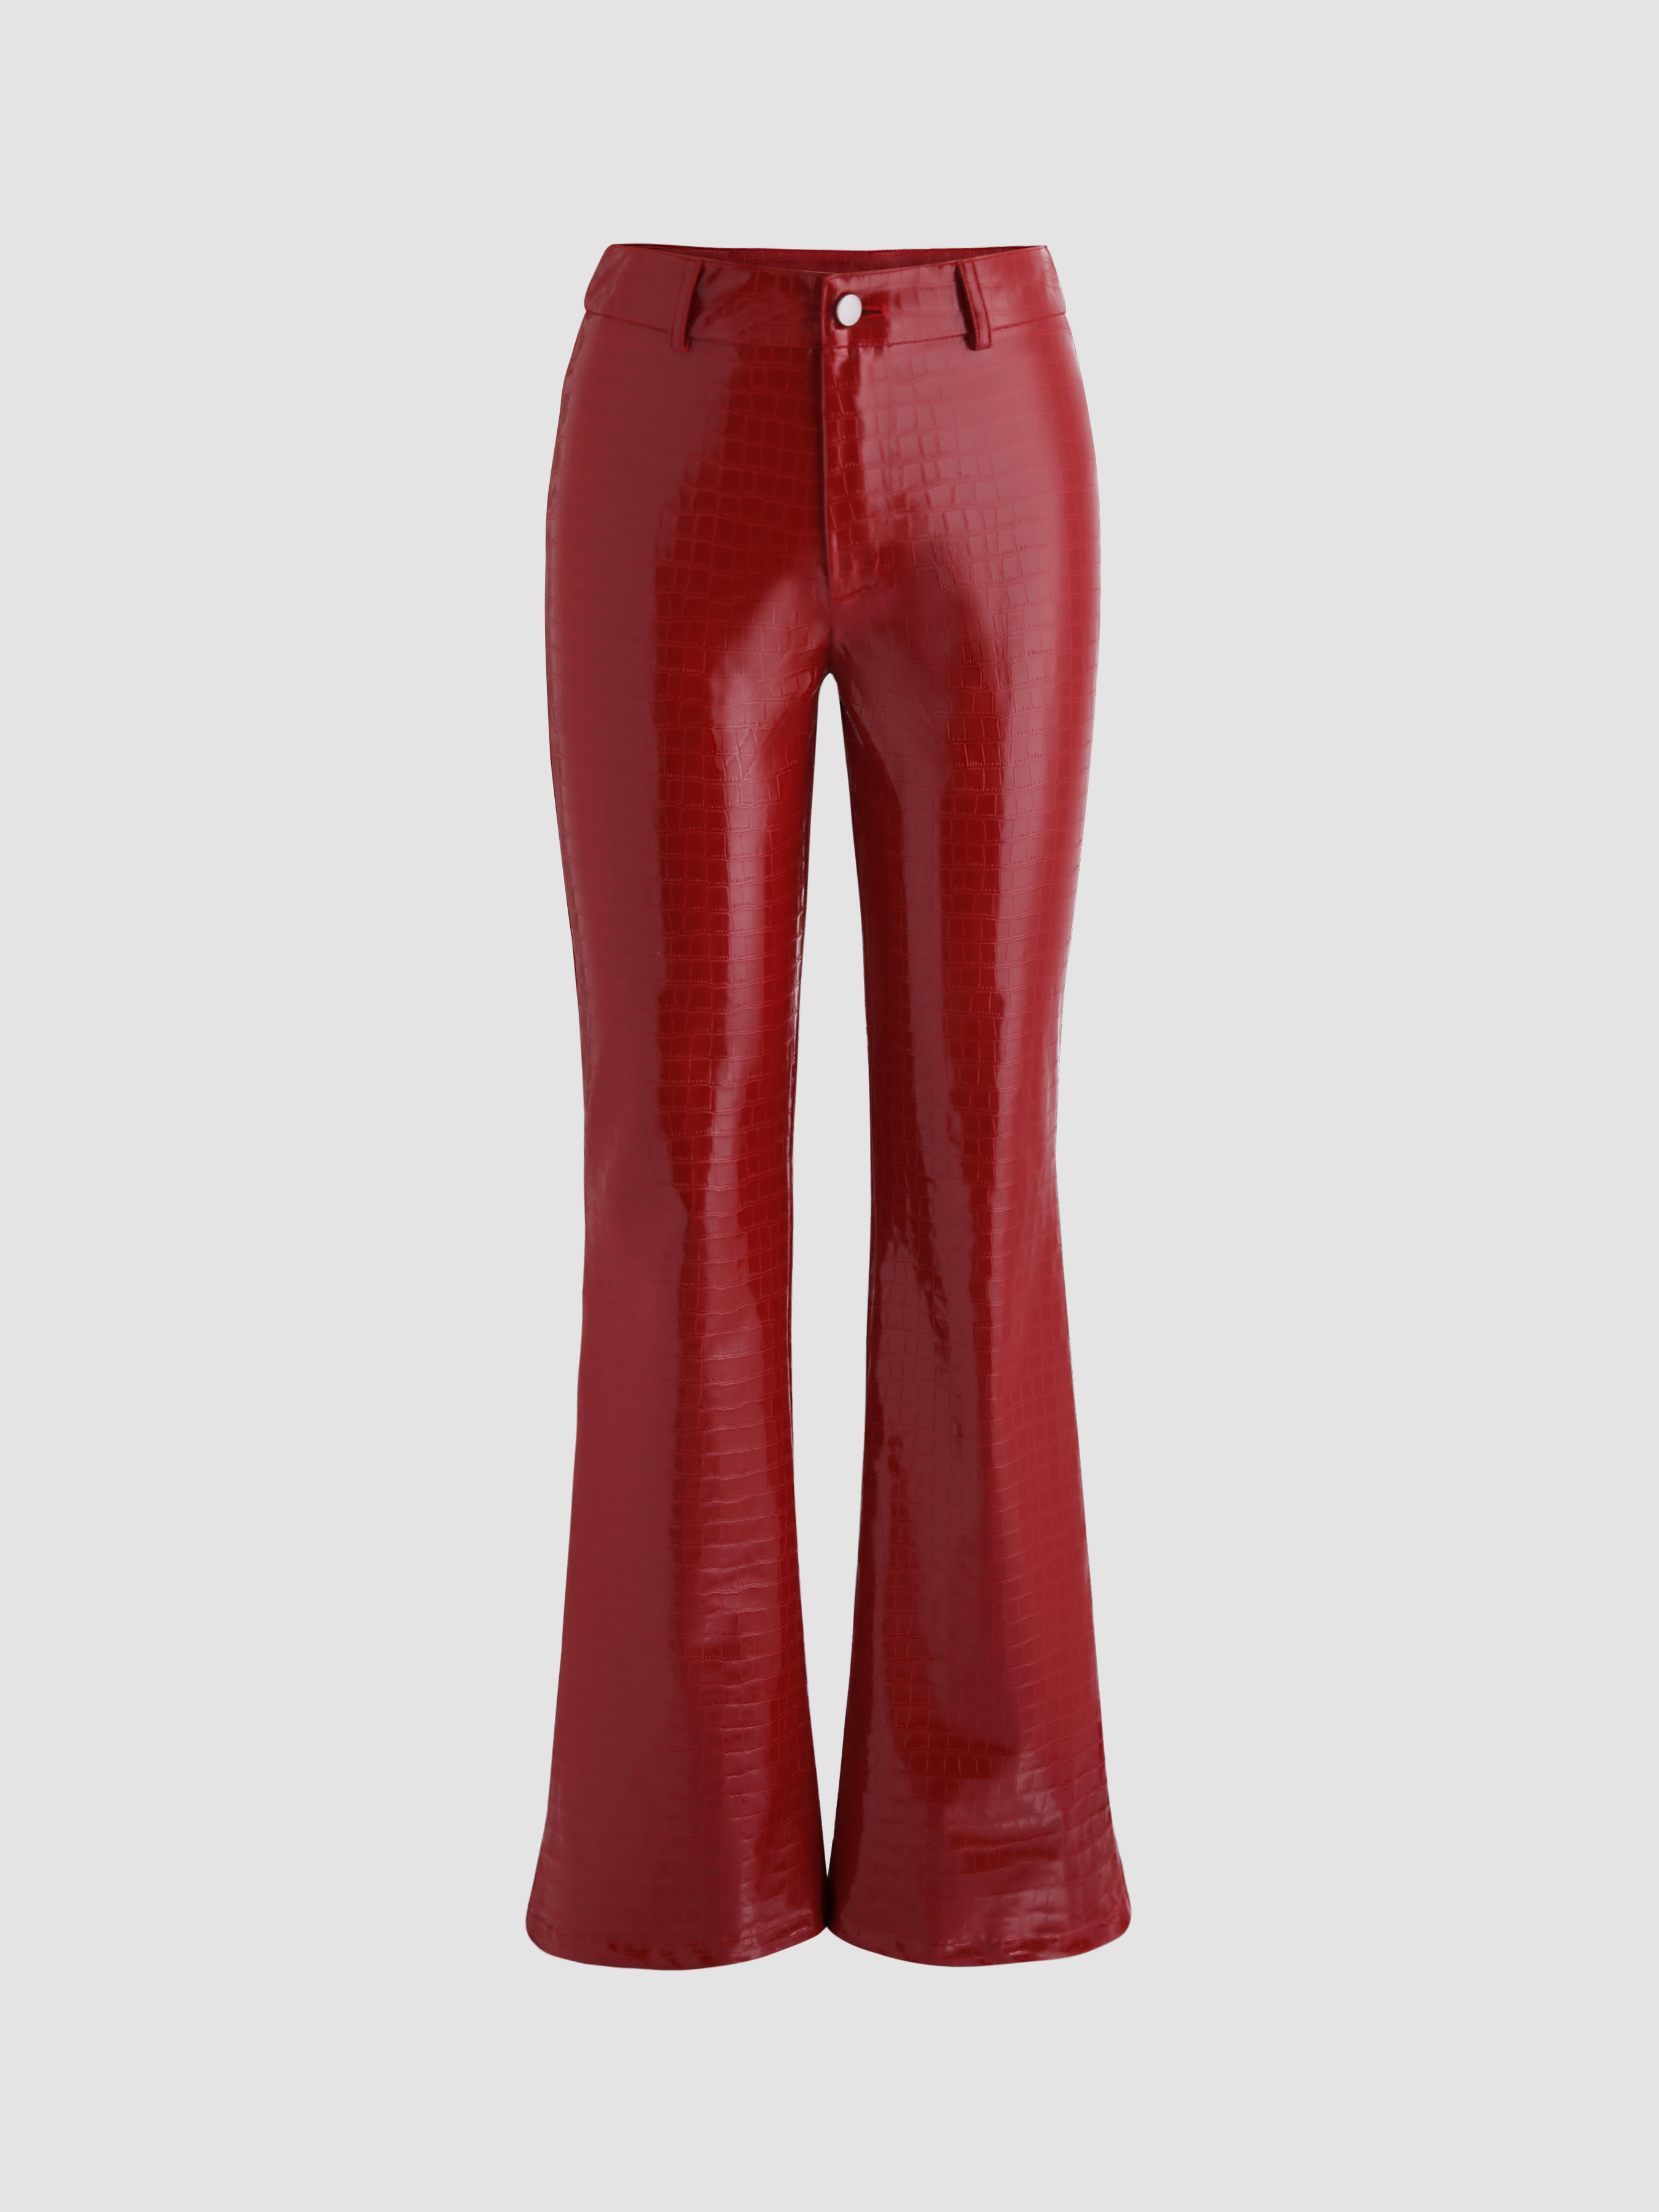 Carol Vorderman puts her gorgeous curves on display in red leather trousers   Daily Mail Online